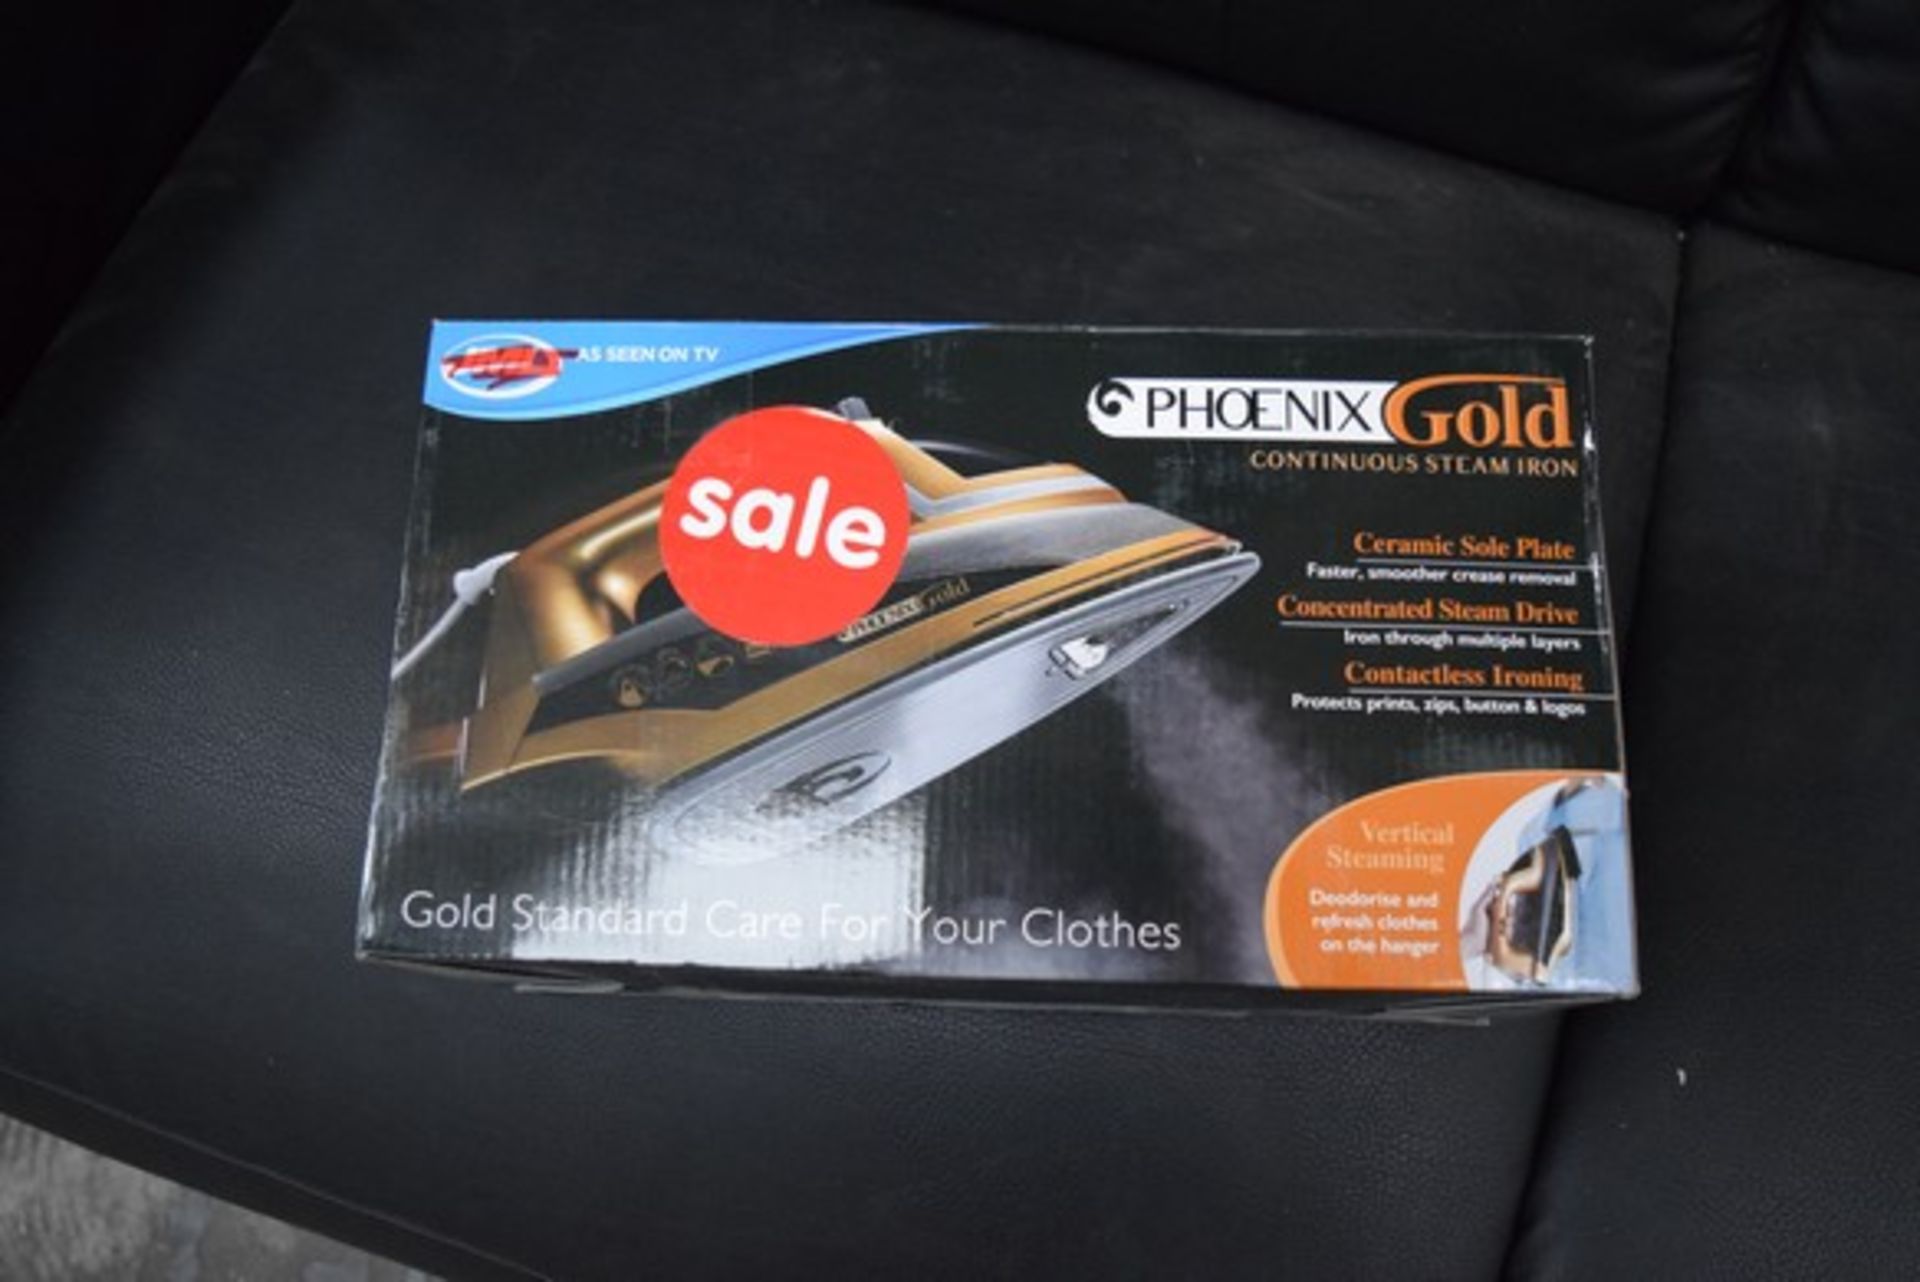 1 x BOXED PHOENIX GOLD CONTINUOUS STEAM IRON RRP £40 10.07.17 *PLEASE NOTE THAT THE BID PRICE IS